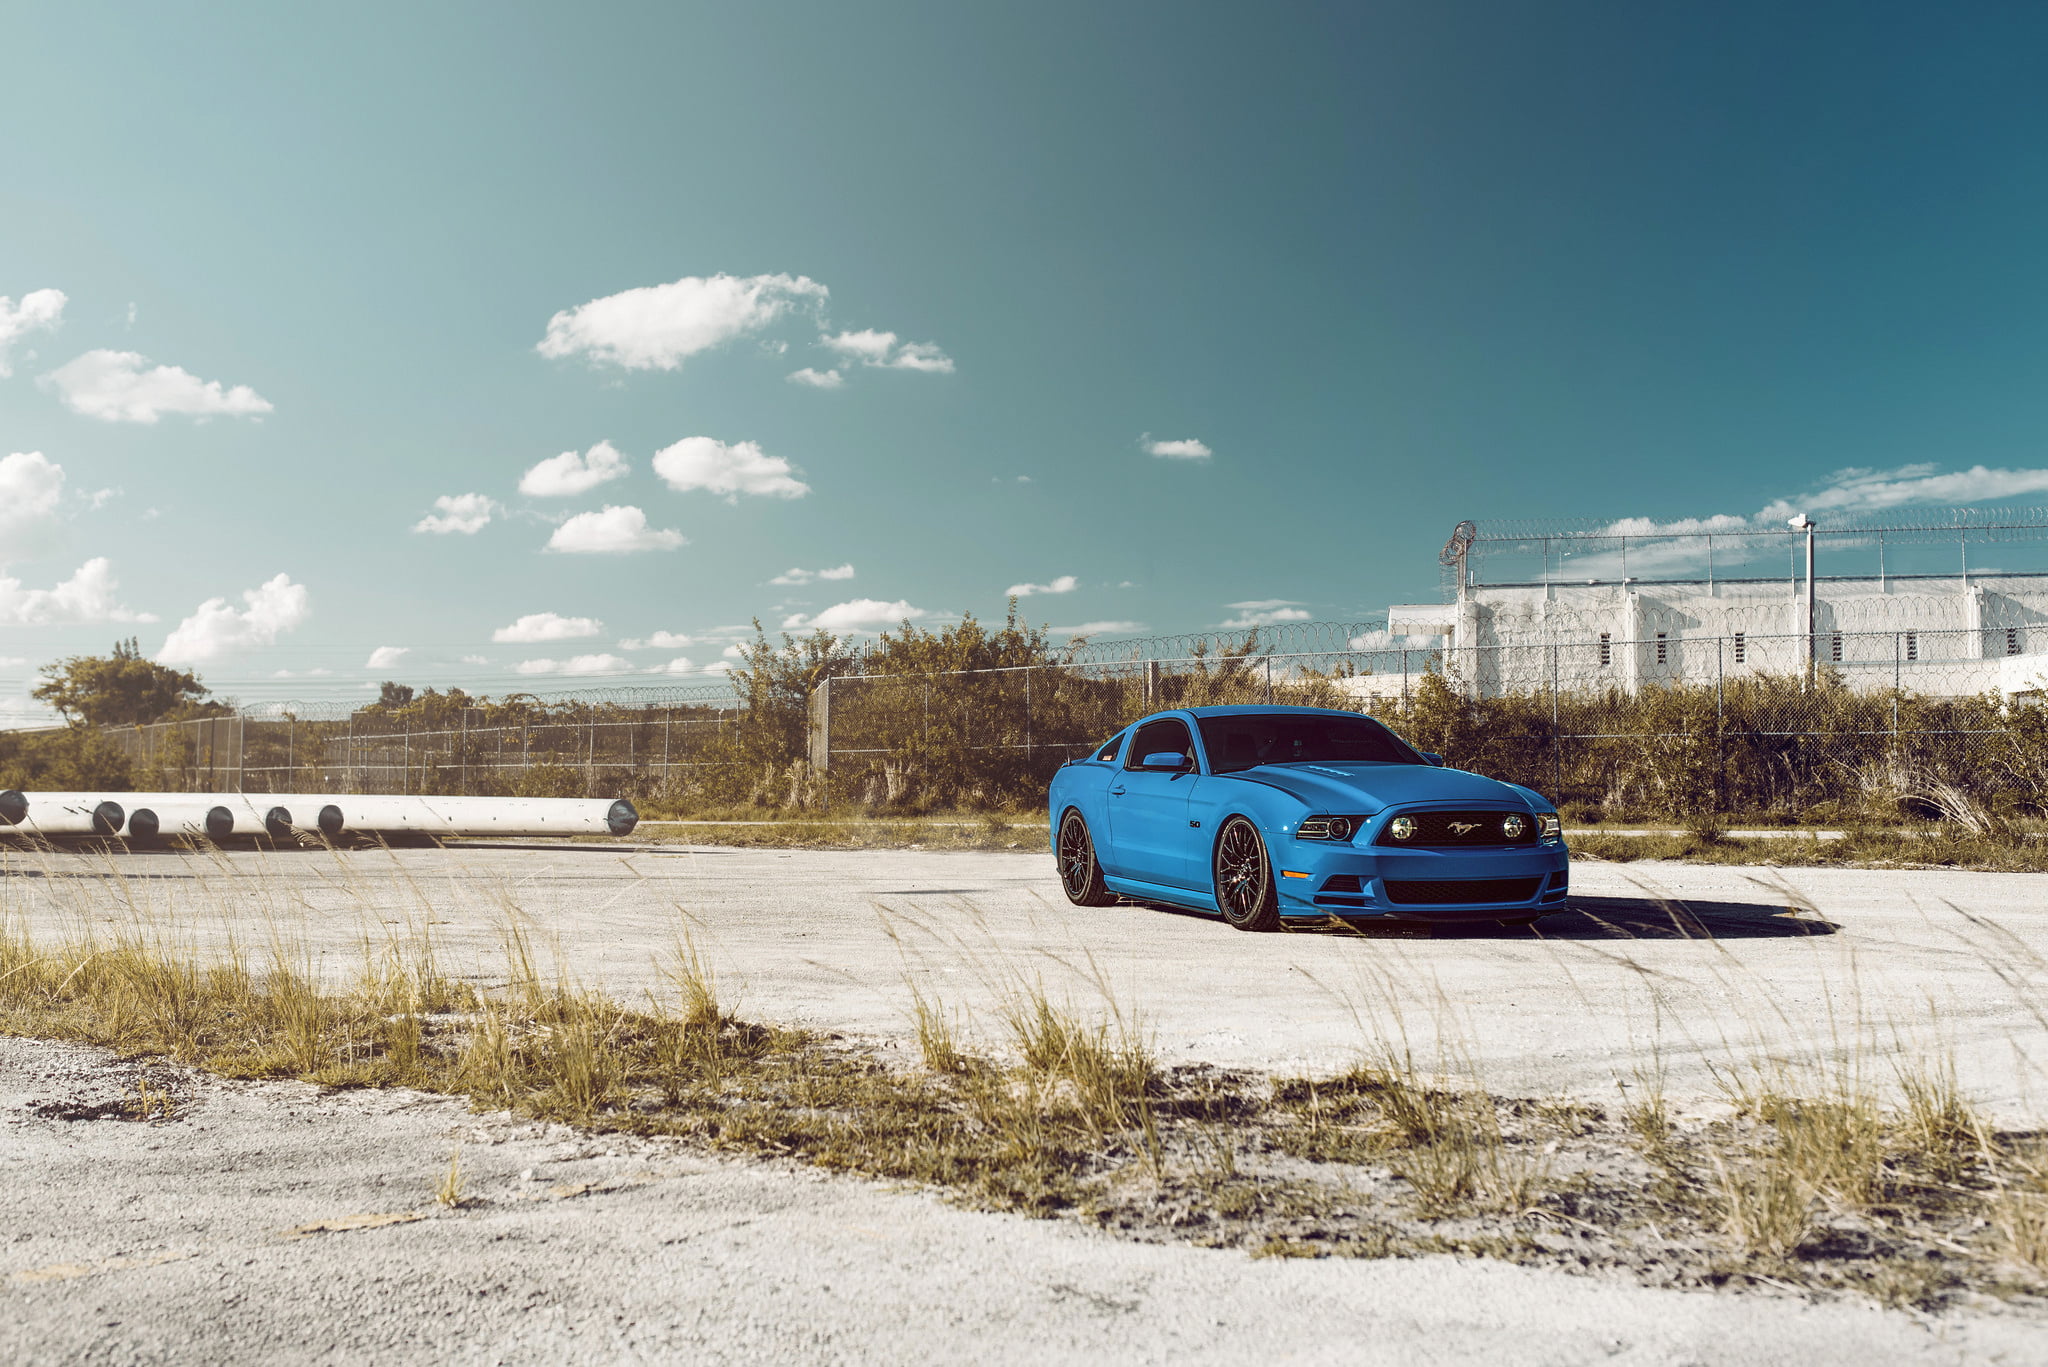 Mustang, Ford, Muscle, Car, Sky, Blue, Front, 5.0